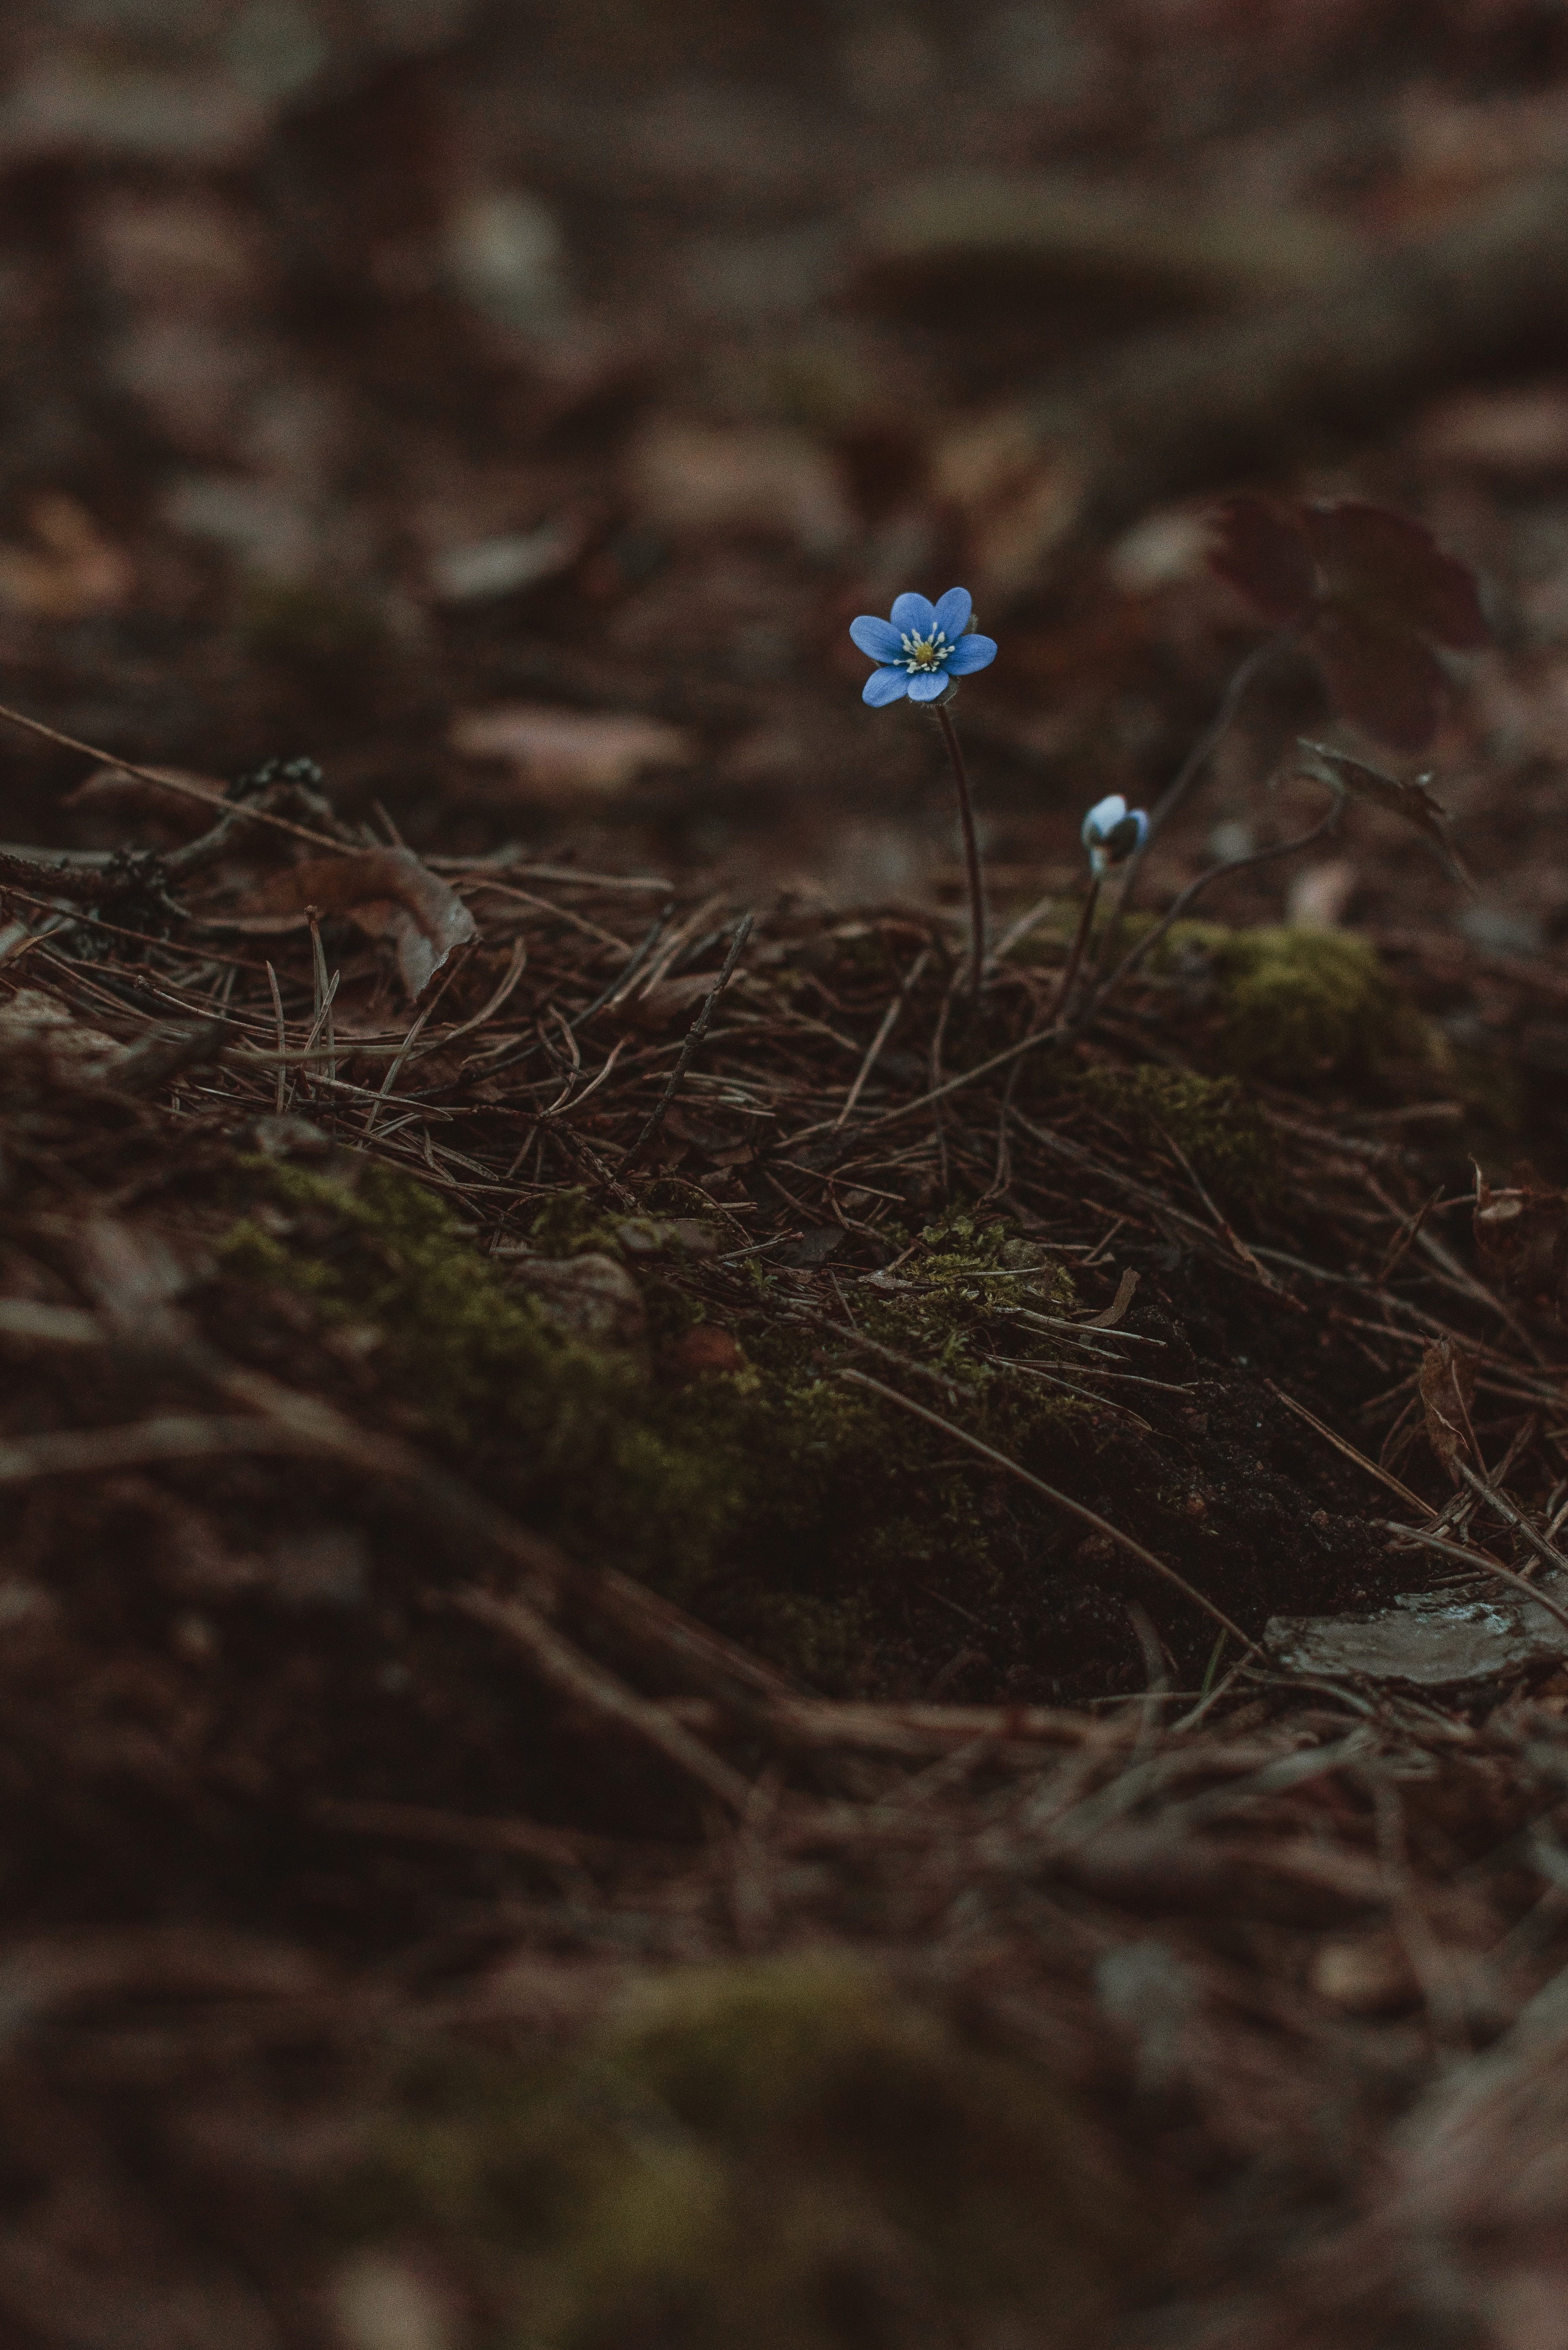 119999 download wallpaper needle, blue, flower, macro, land, earth, moss, alone, lonely, wild, early, arenaria screensavers and pictures for free